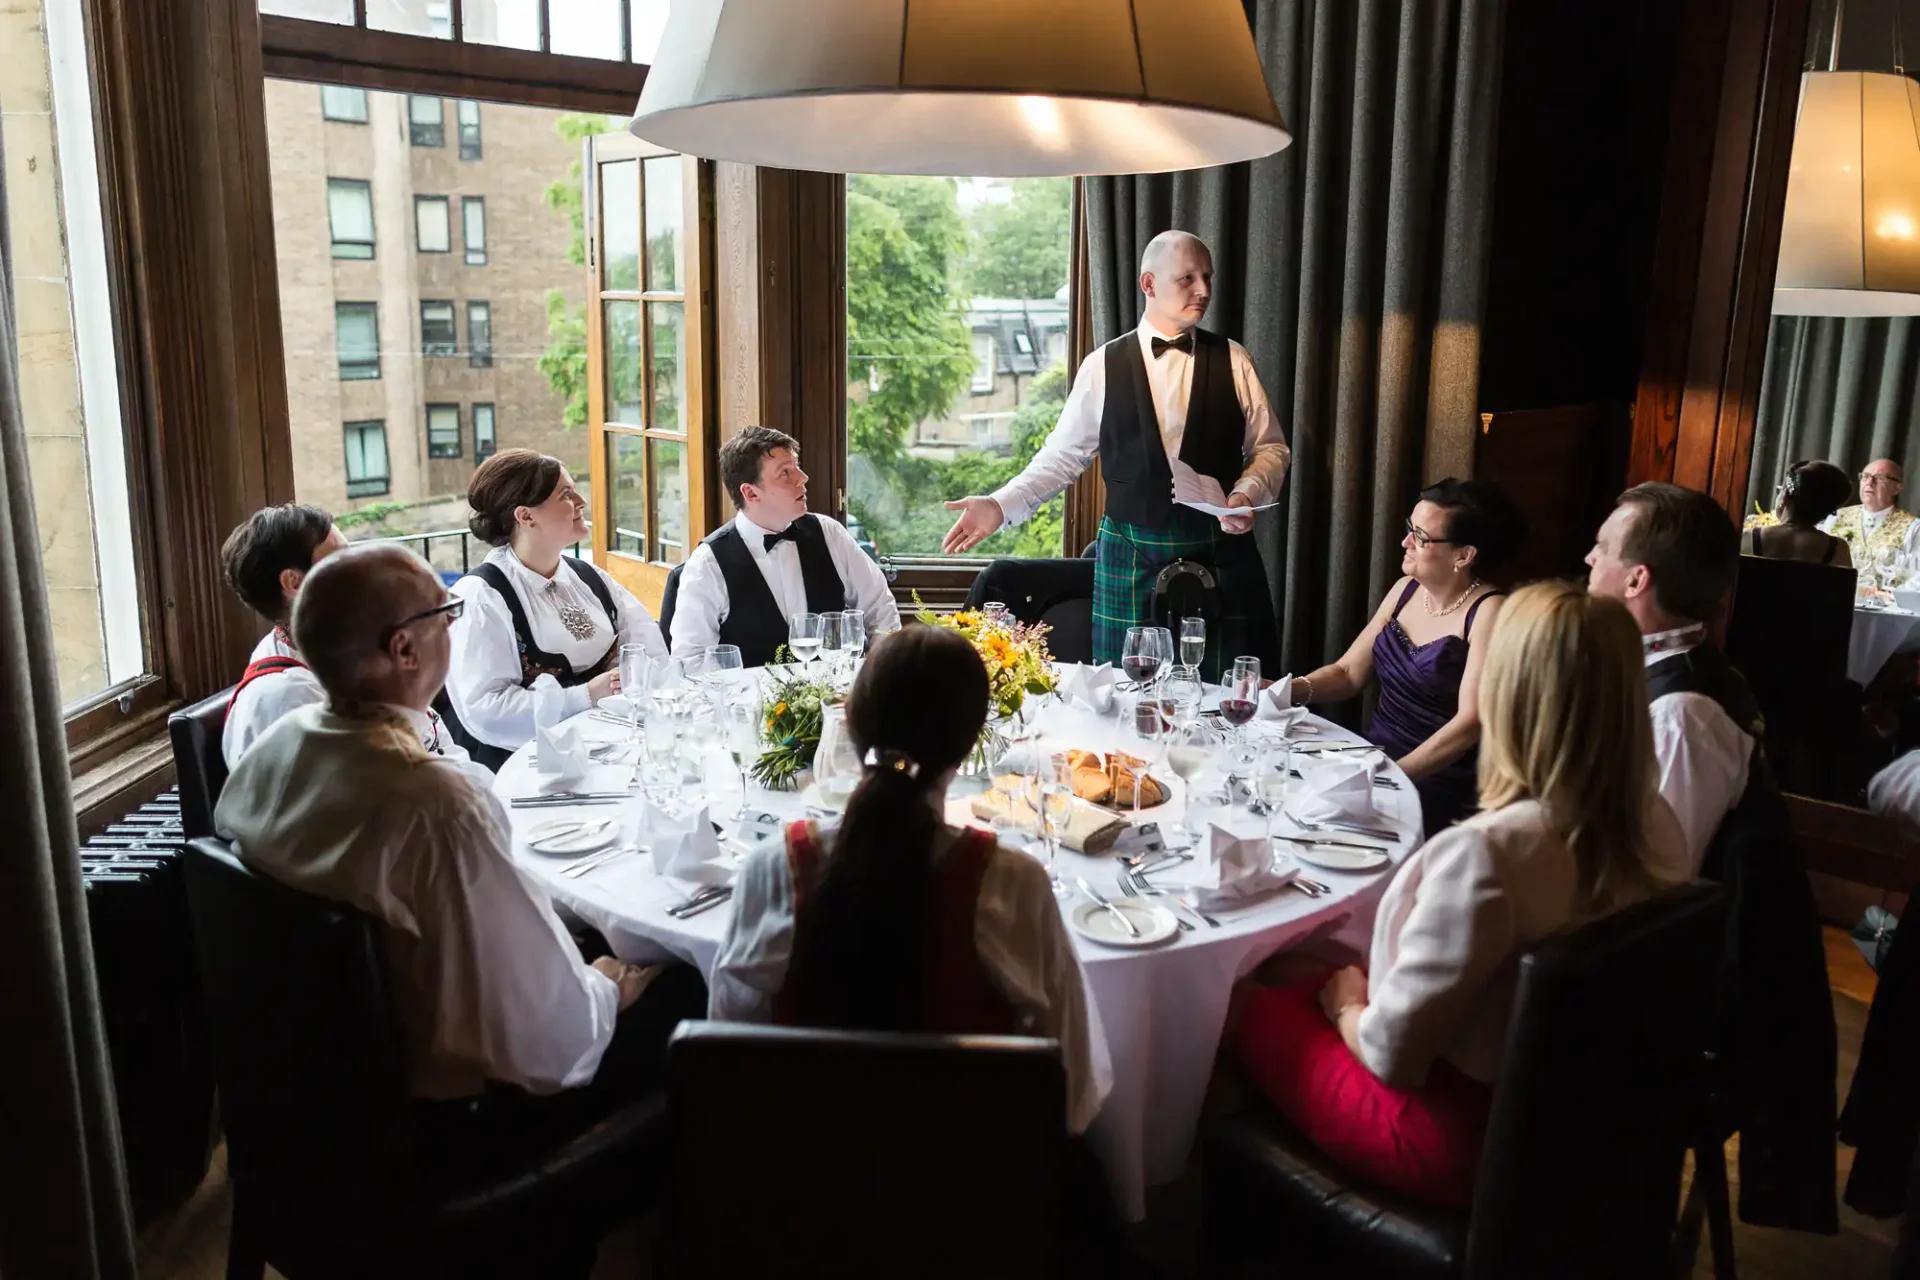 A waiter in a formal outfit addresses a group of guests seated around a dining table in an upscale restaurant.